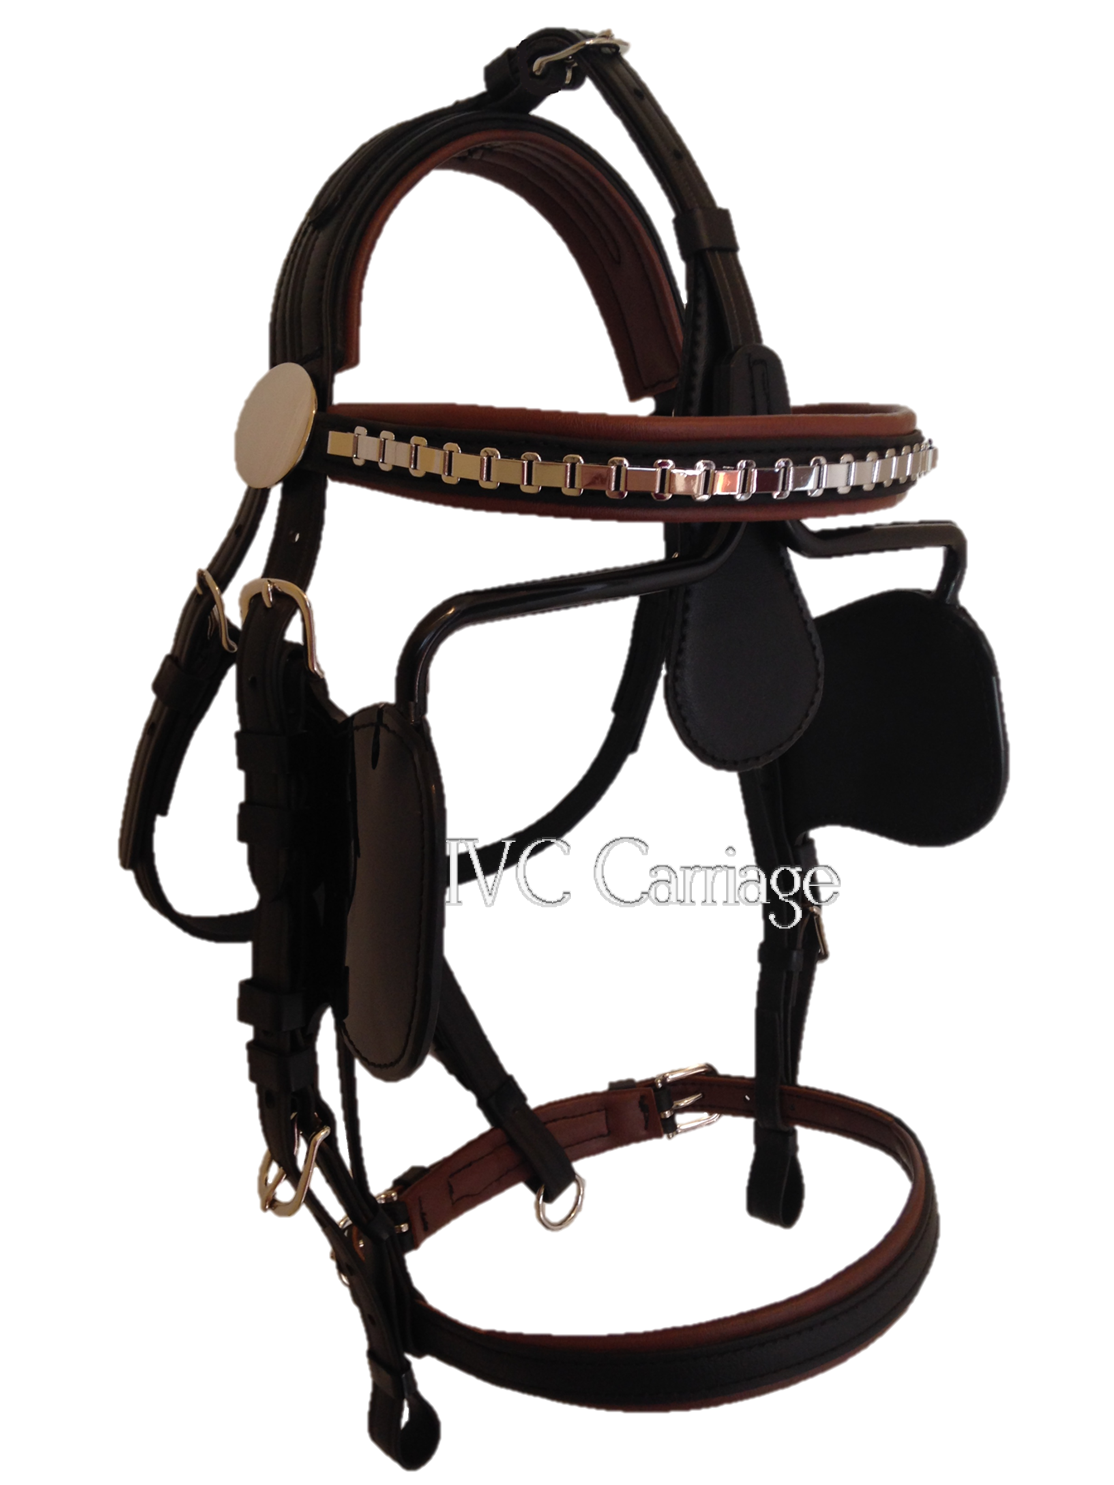 BioThane Harness Bridle | IVC Carriage